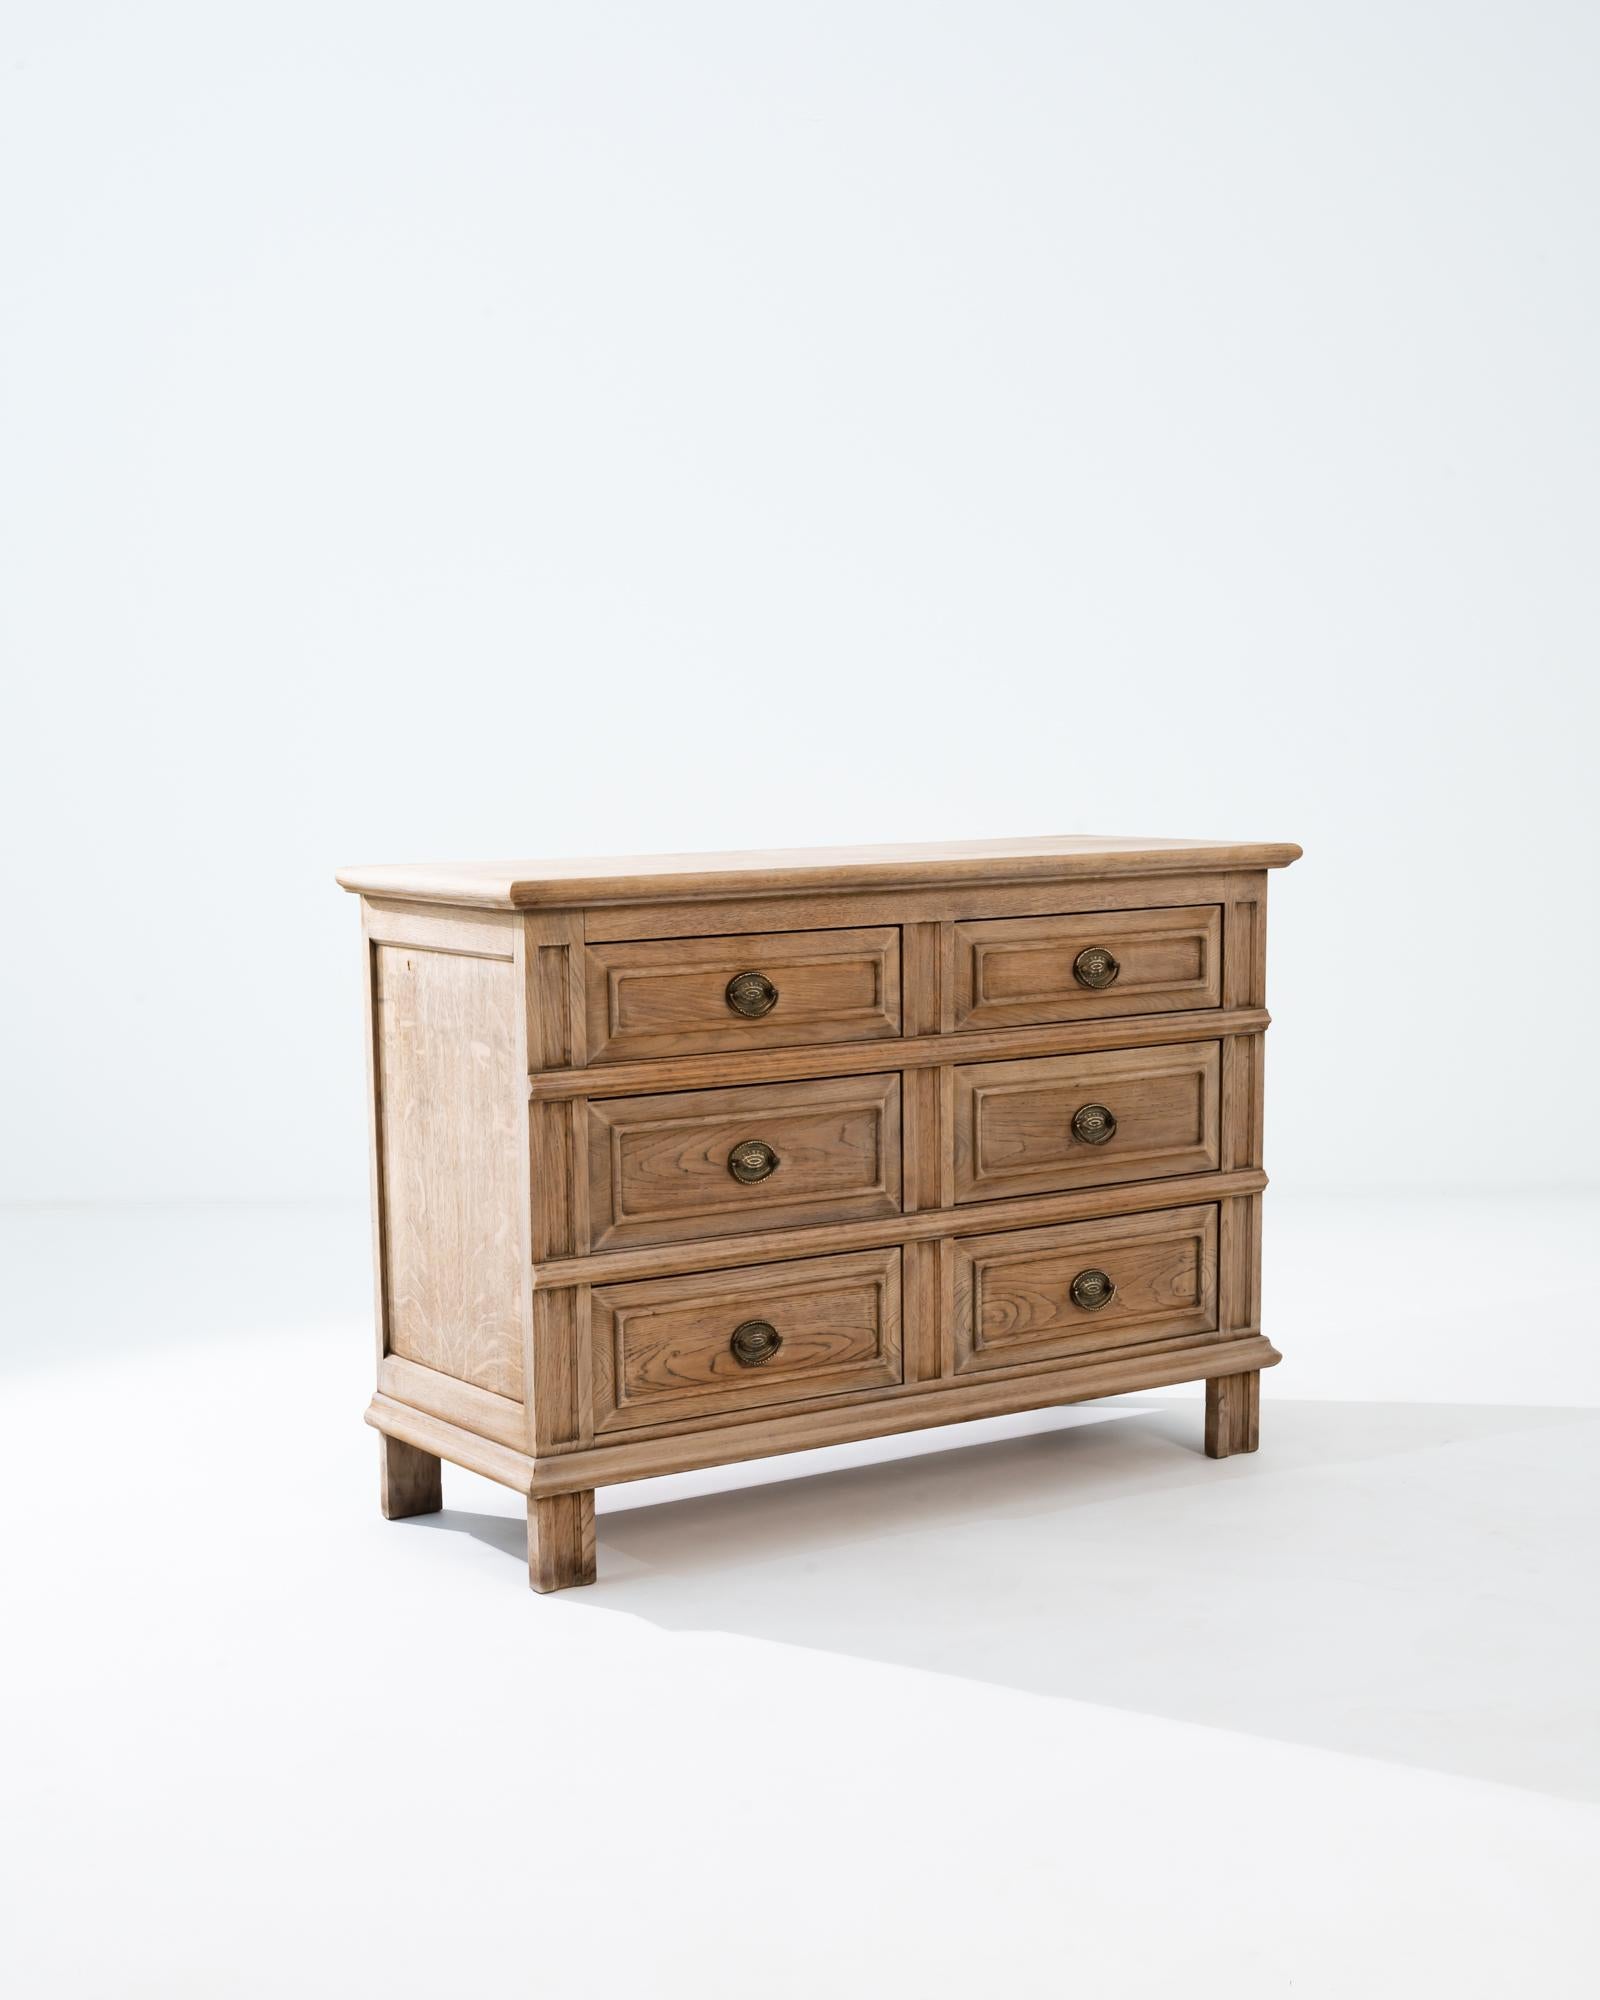 A wooden chest of drawers from France, circa 1900. This chest is composed of six drawers which have been fit with intricate brass drawer handles. Carefully contoured legs add just enough detail to accentuate this chest of drawers ornate form. A